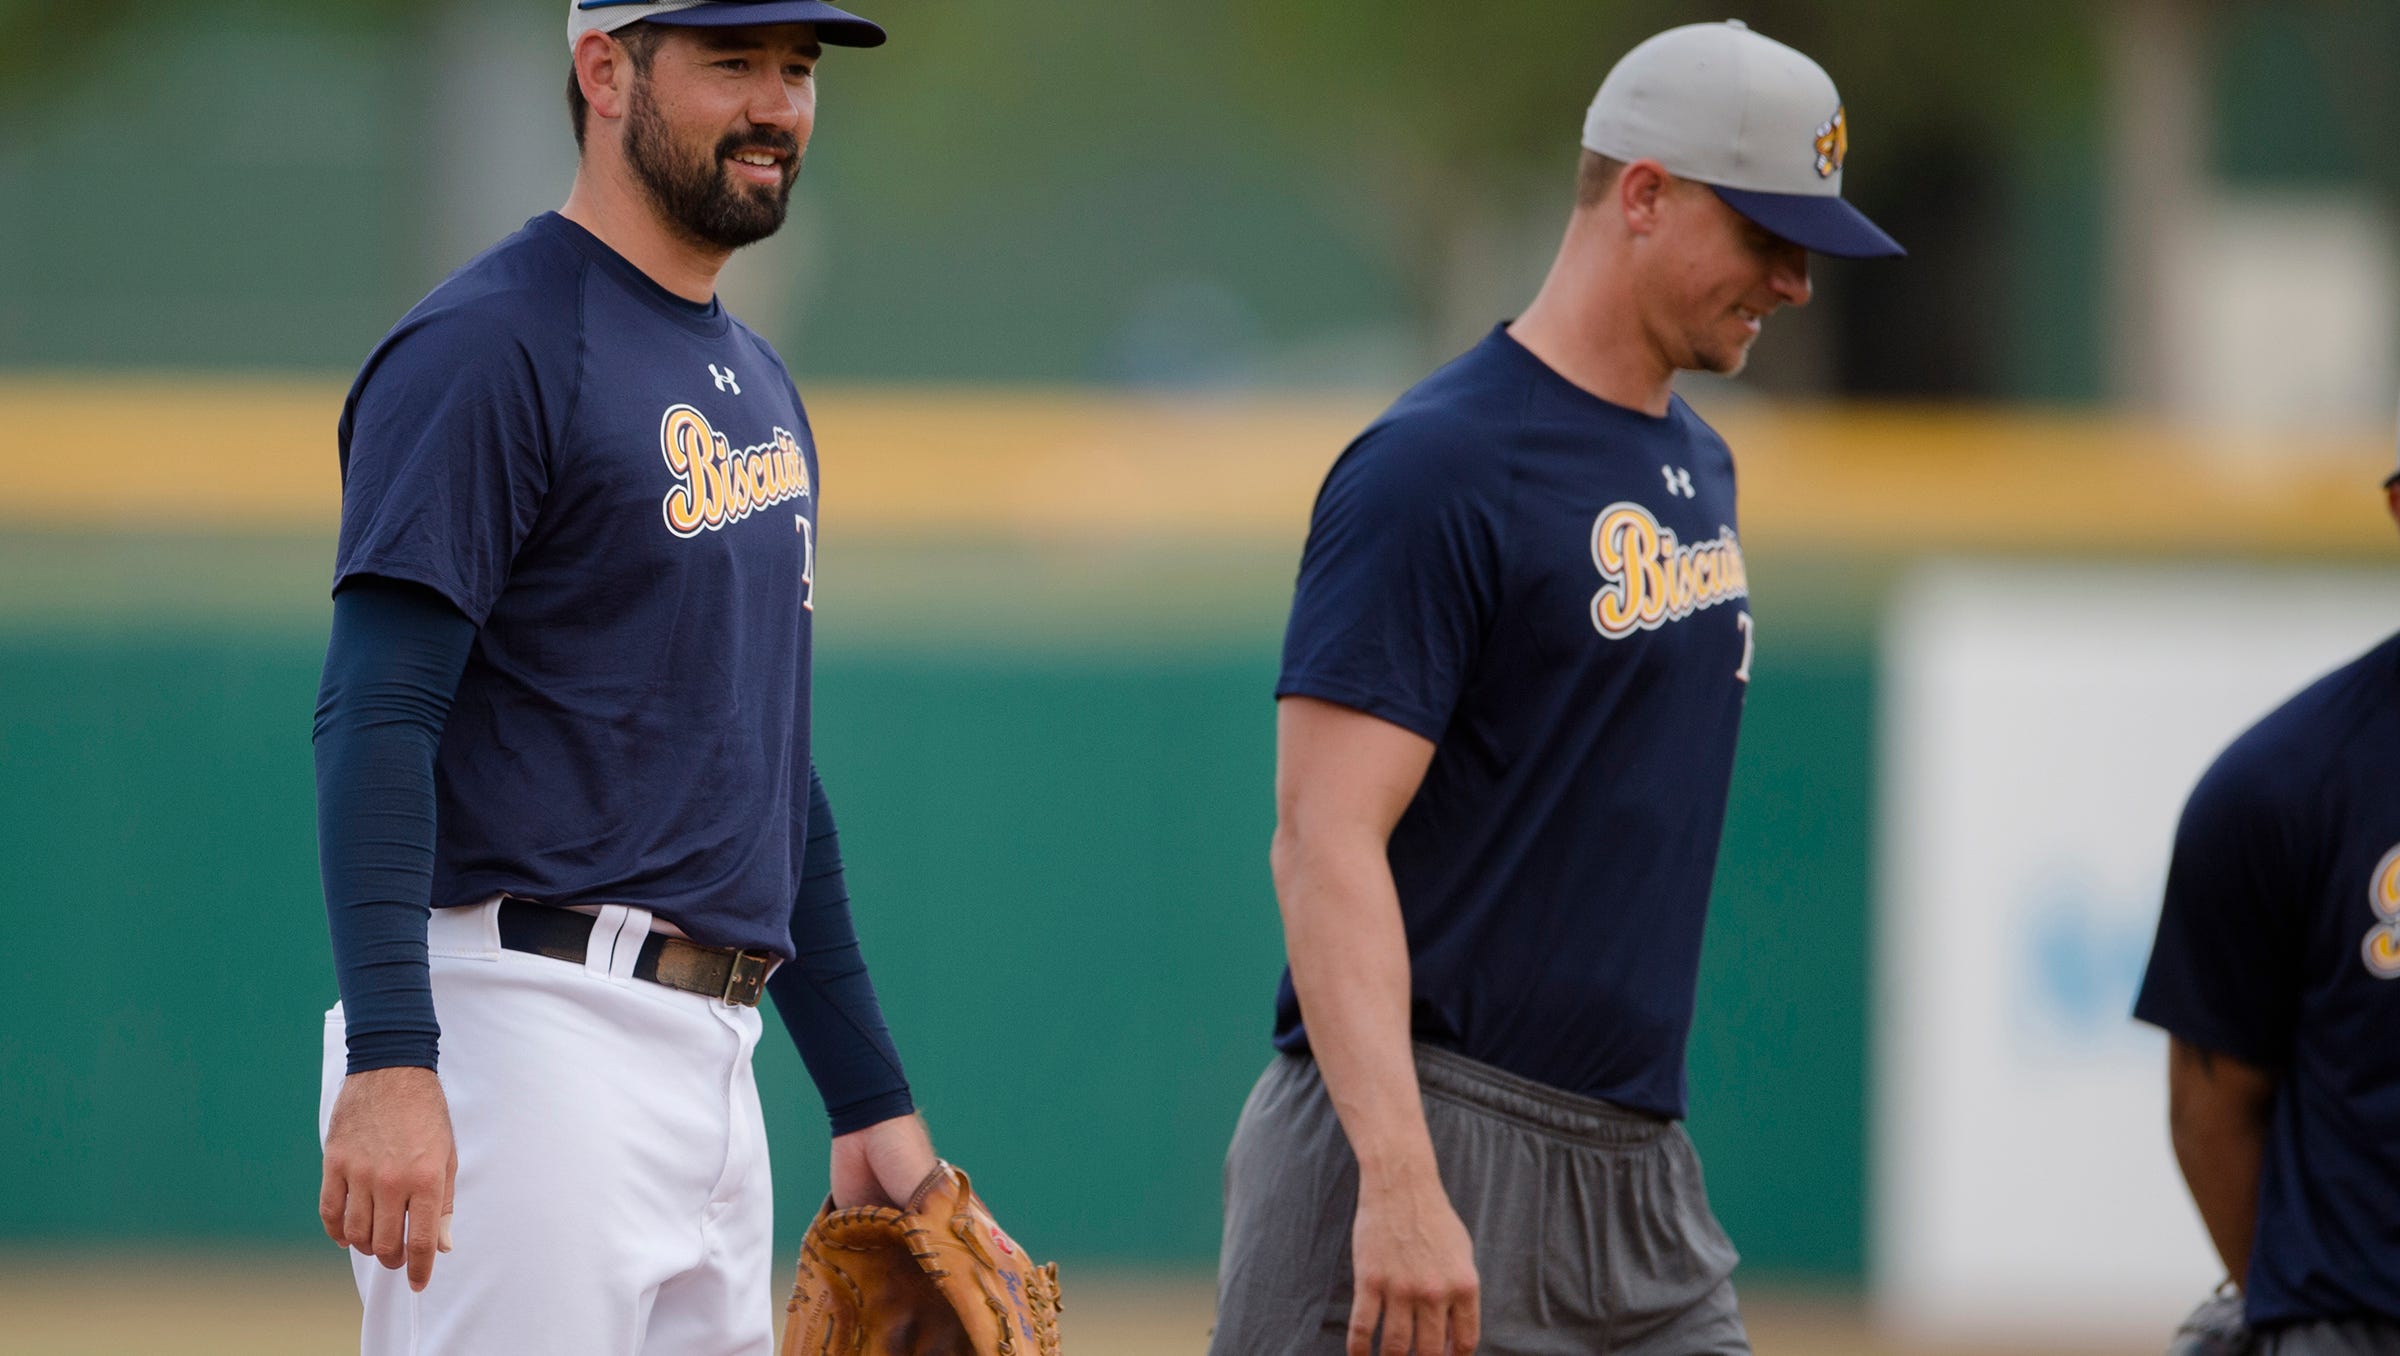 Football is the past: Biscuits' Lee left LSU for baseball shot